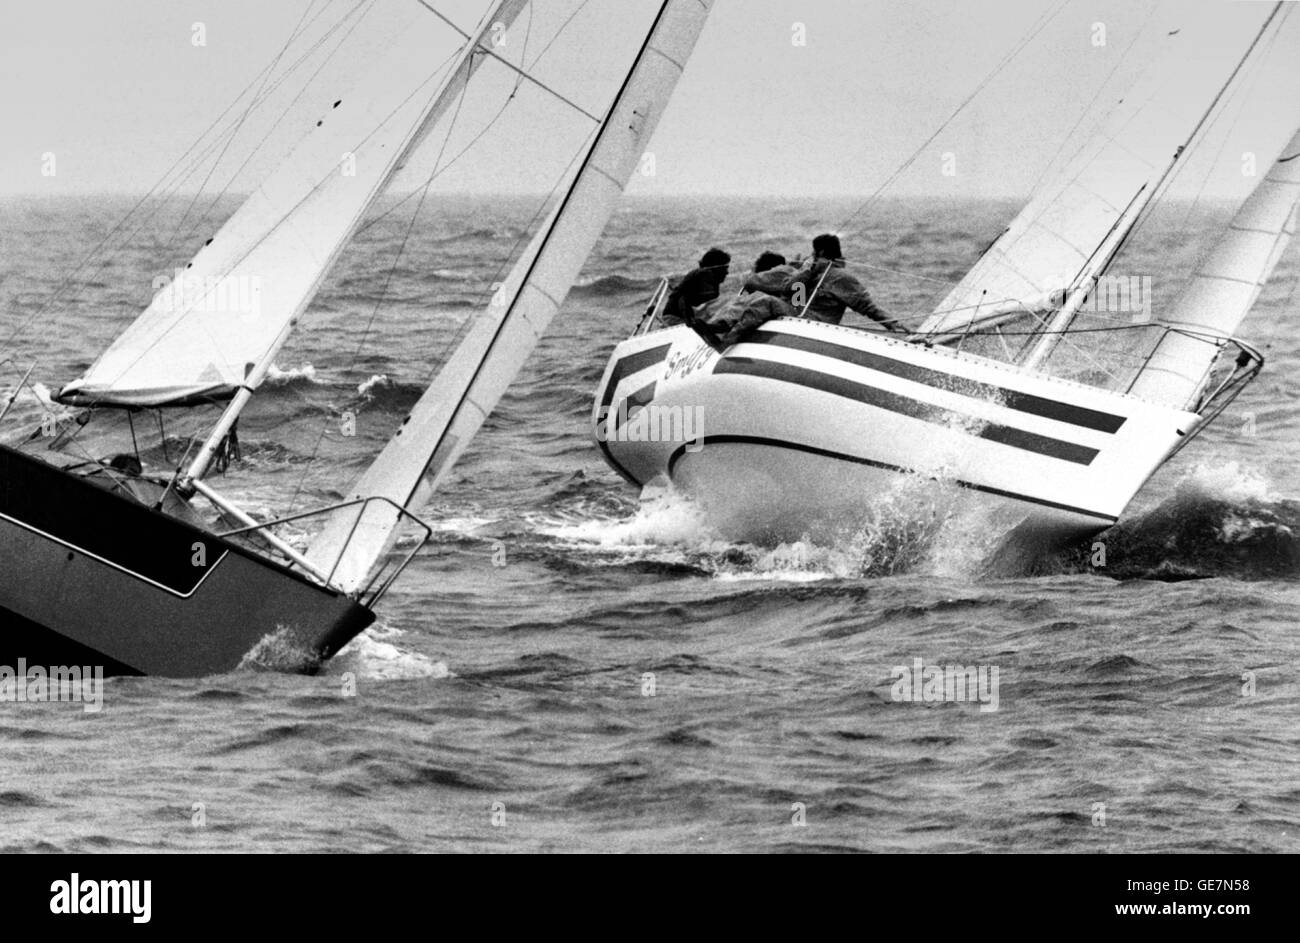 AJAX NEWS PHOTOS. 1979.SCHEVENINGEN, HOLLAND. - HALF TON WORLD CHAMPIONSHIPS -  (L-R) SOLUTIONS AND SMIFFY COMING TO THE WEATHER MARK. PHOTO:JONATHAN EASTLAND/AJAX REF:HDD/()YAR 1 2TON79 SOLU SMIFFY Stock Photo